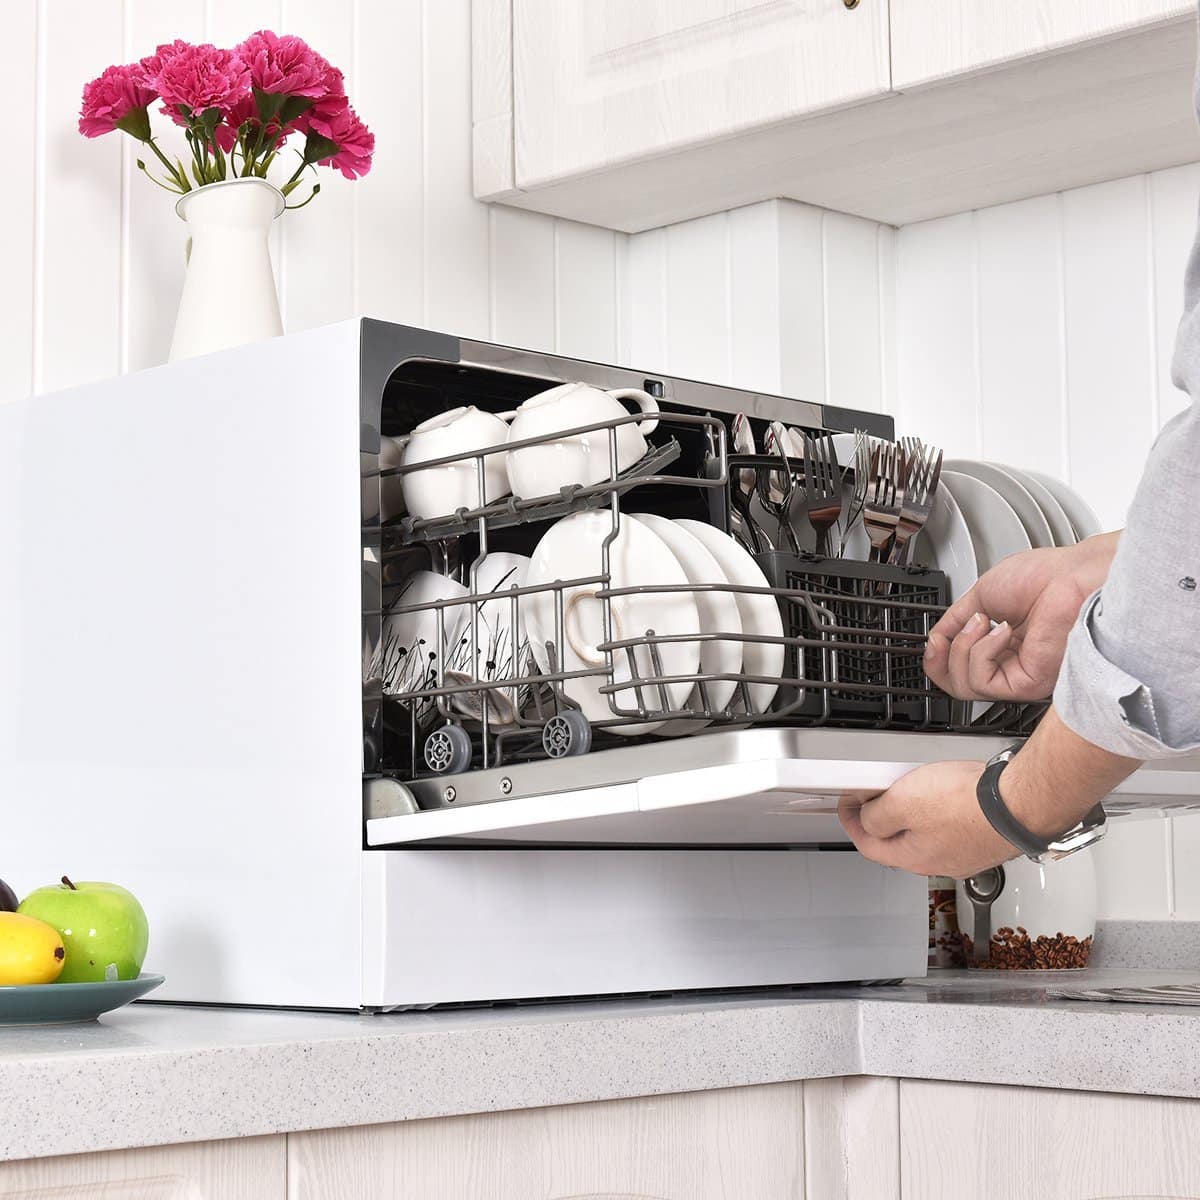 Top 10 Best Portable Dishwashers Reviews in 2018